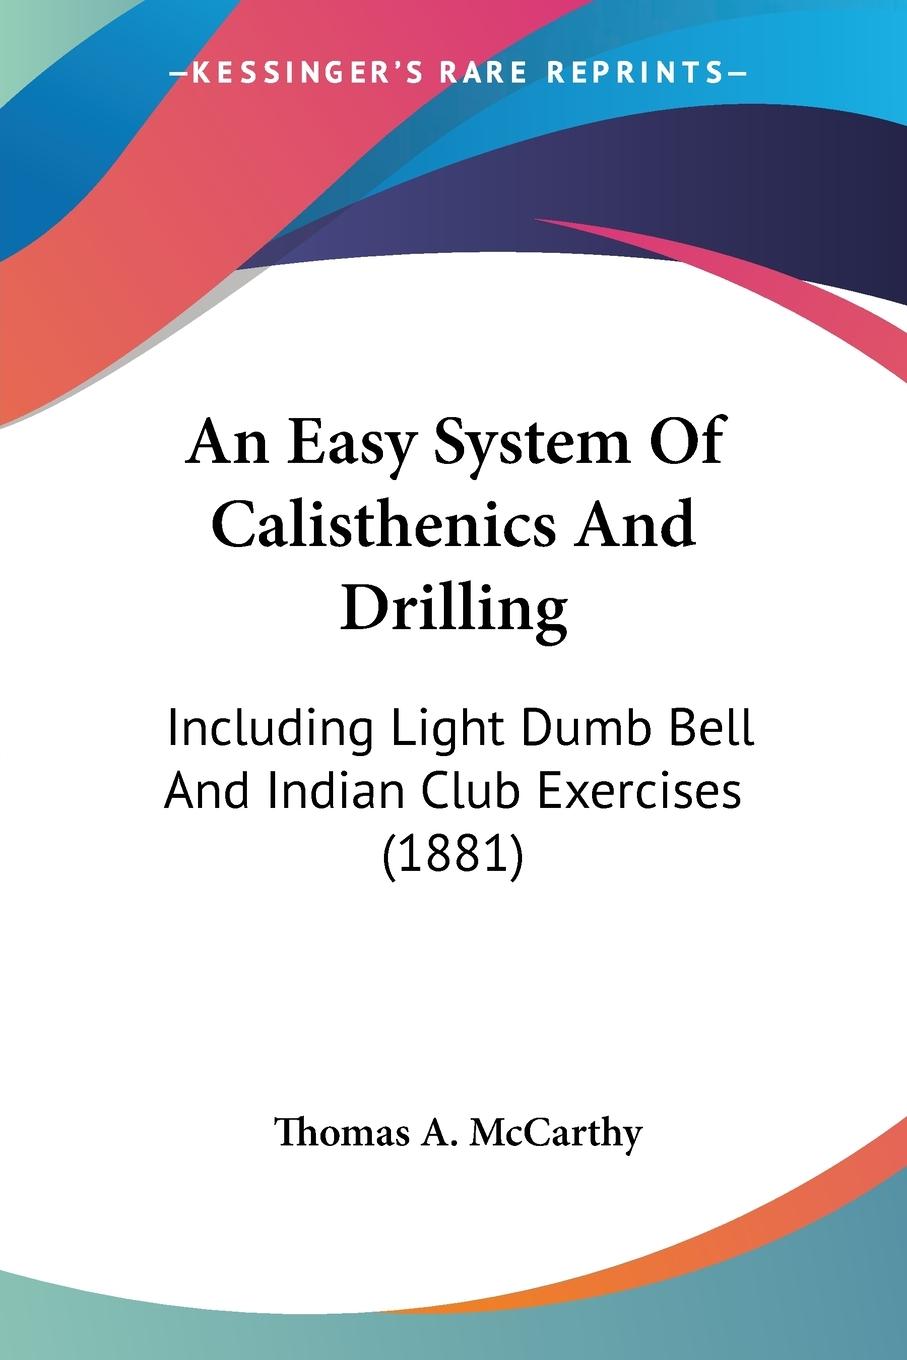 An Easy System Of Calisthenics And Drilling - McCarthy, Thomas A.